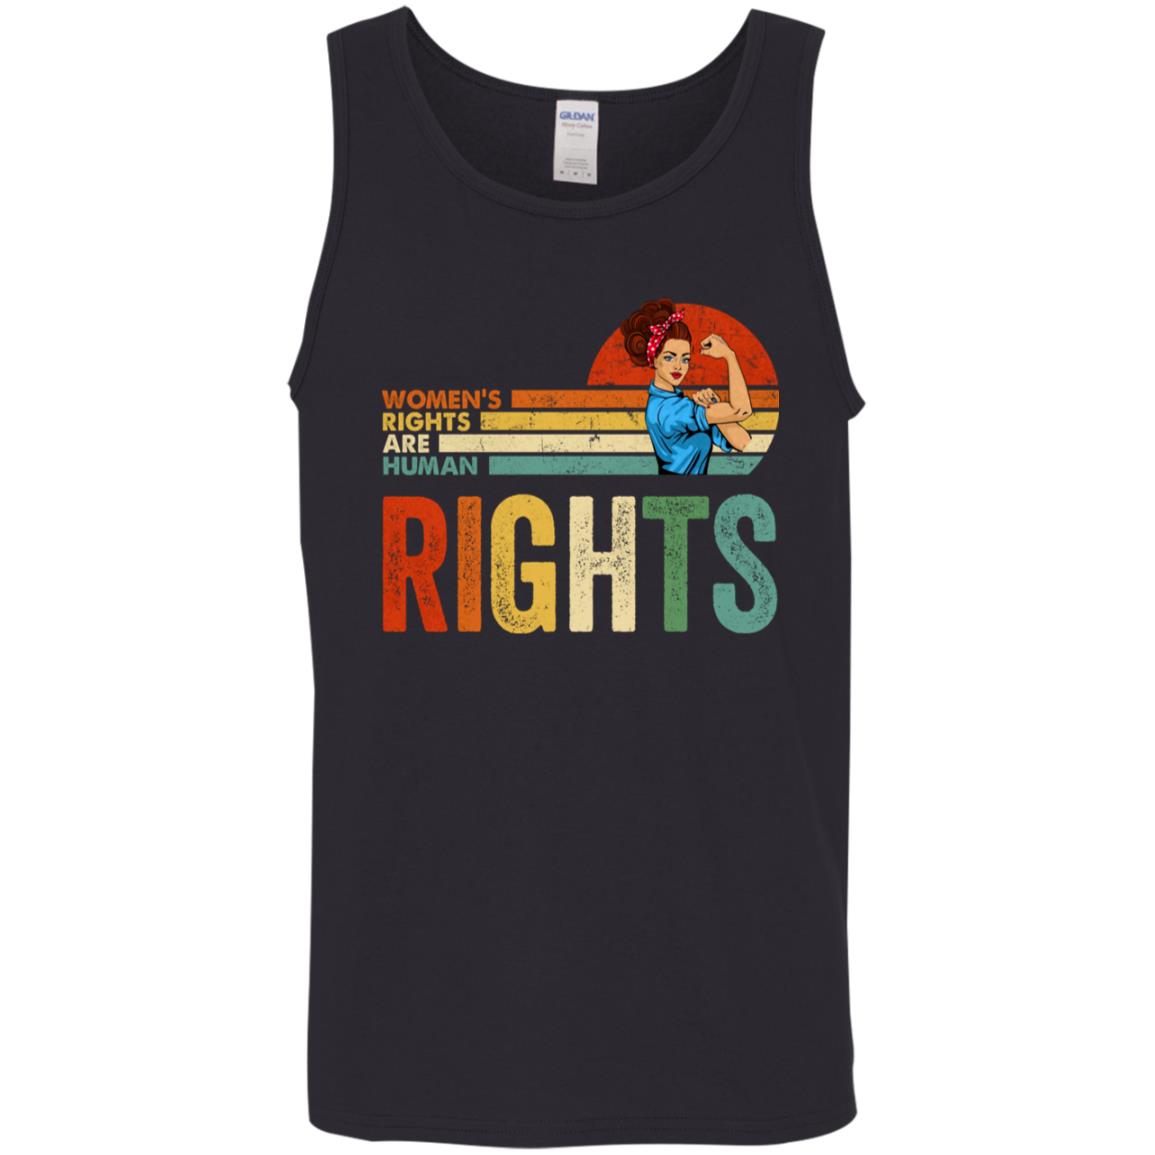 Women's Rights Are Human Rights Shirt Support For Women Feminist Female Vintage Rosie Shirt